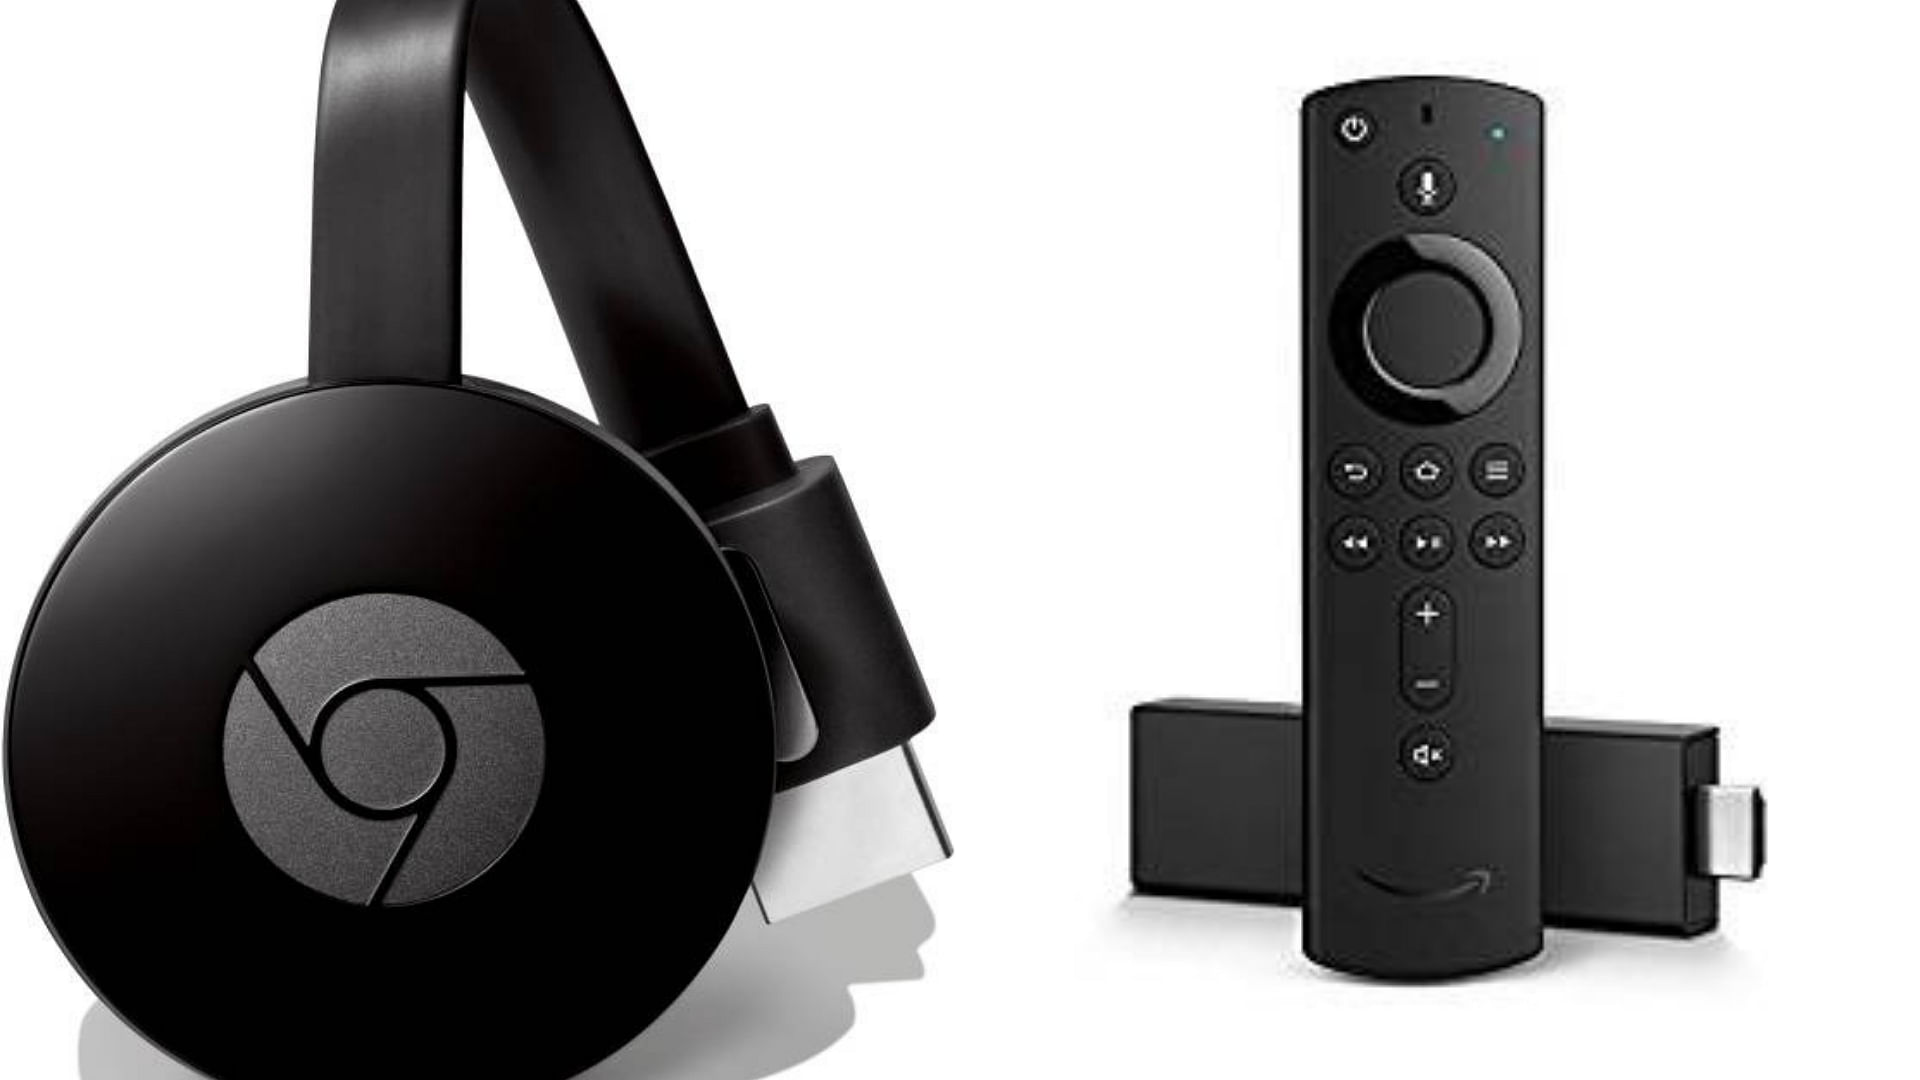 The agreement enables Amazon Prime members streaming to Chromecast or using Android TV devices to access Amazon’s video content.